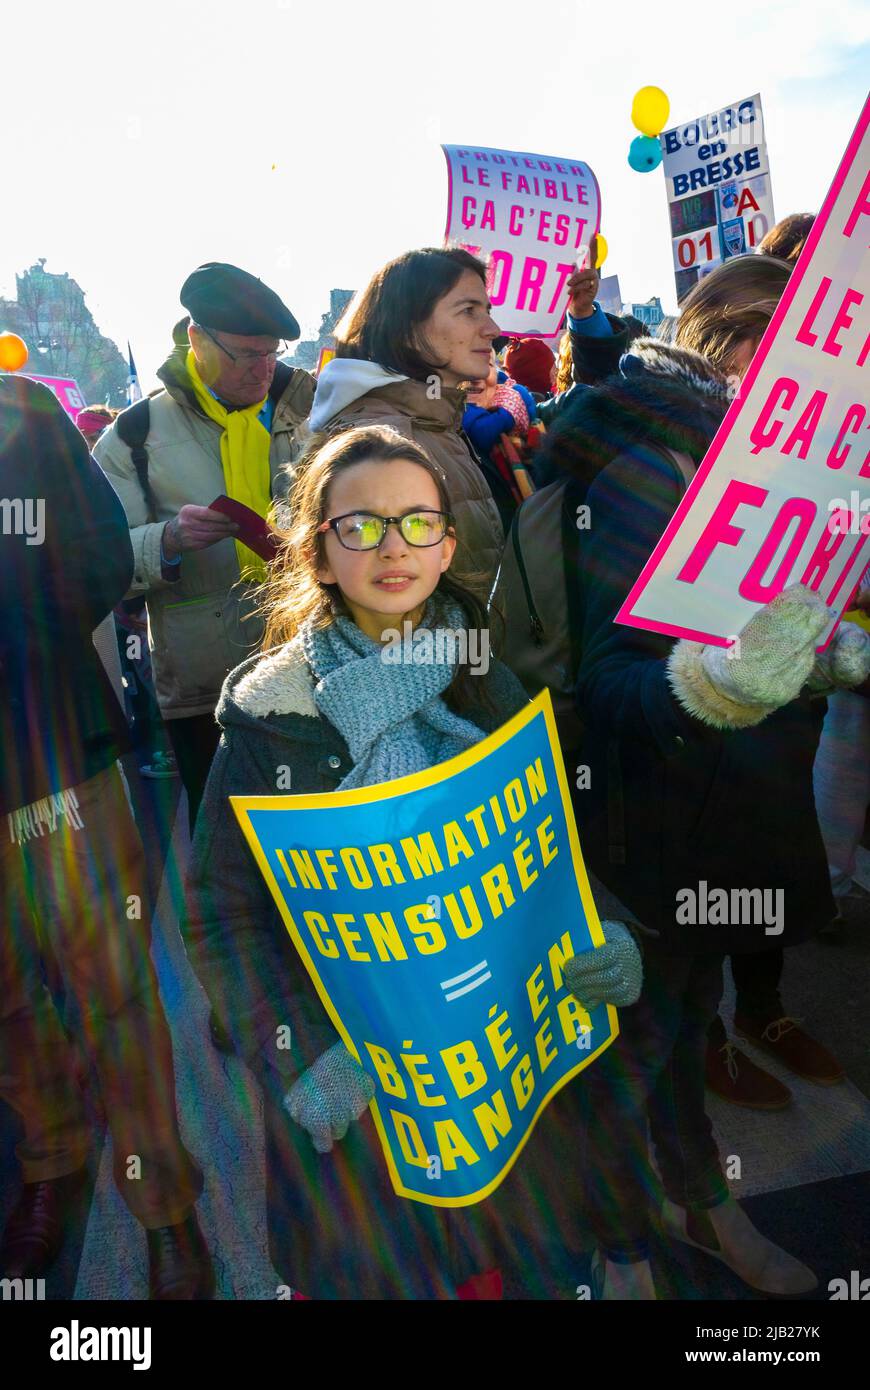 Paris, France, Crowd People, Traditionalists, Pro-Life, Anti-Abortion Demonstration, 'March Pour la Vie' Young Girl Holding Protest Sign against 'Censorship' Stock Photo